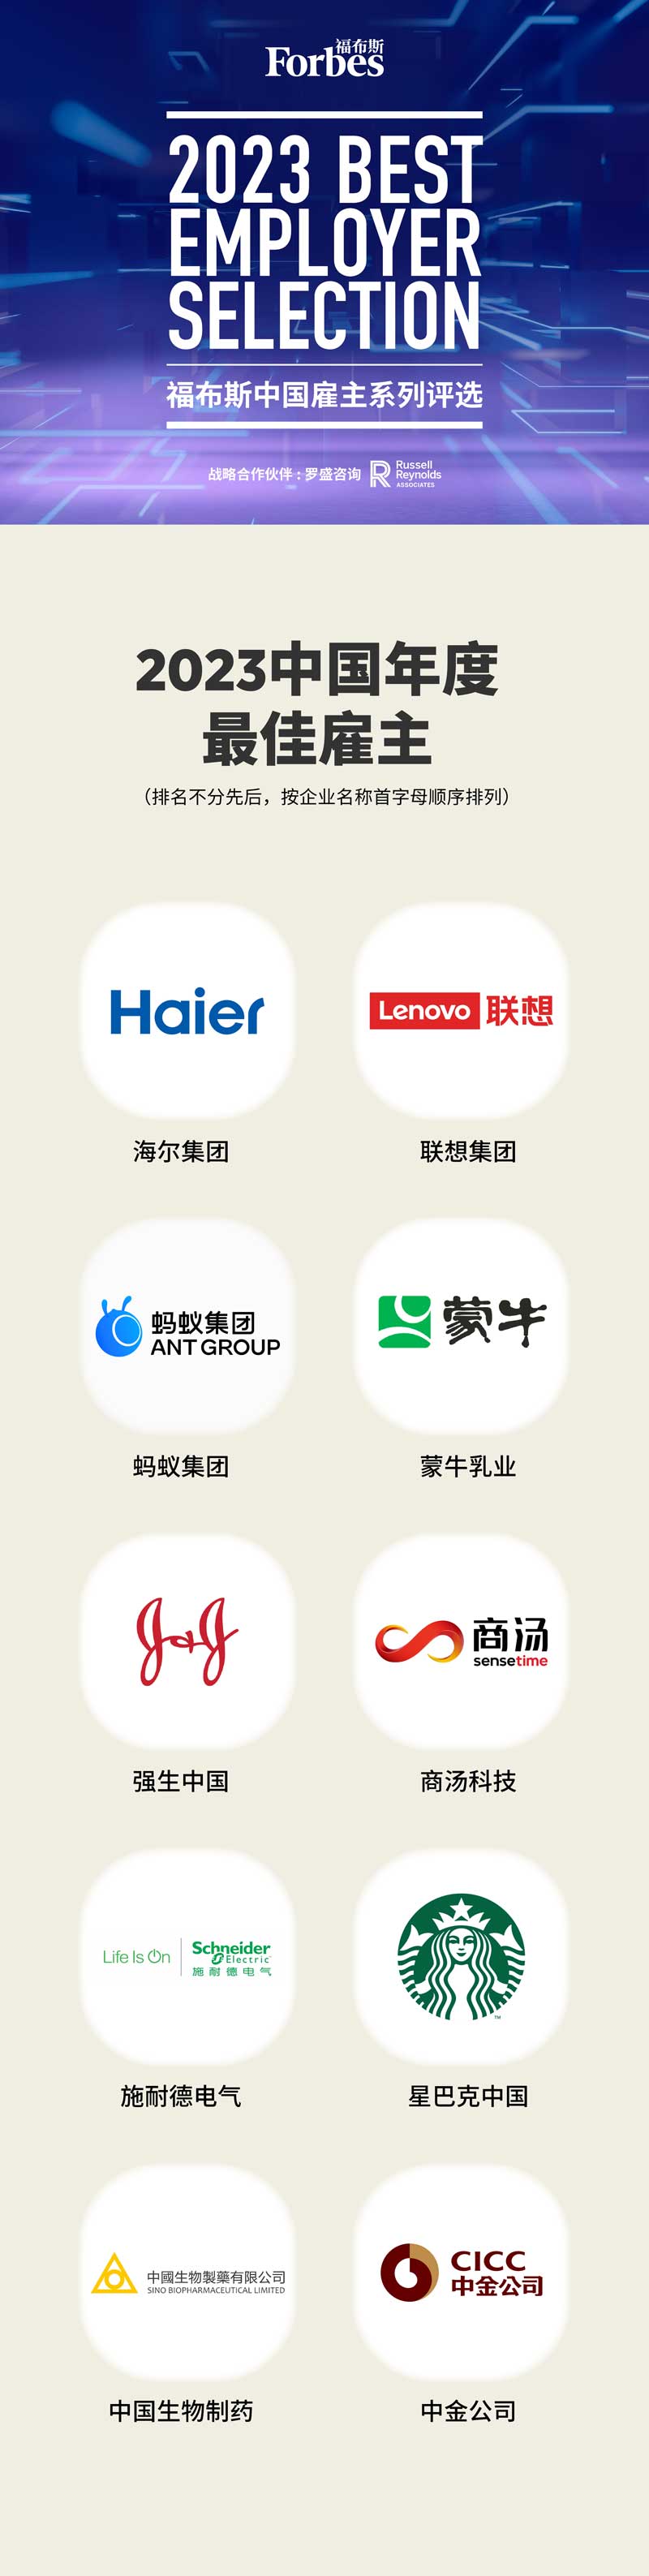 Forbes China best employer - Master list